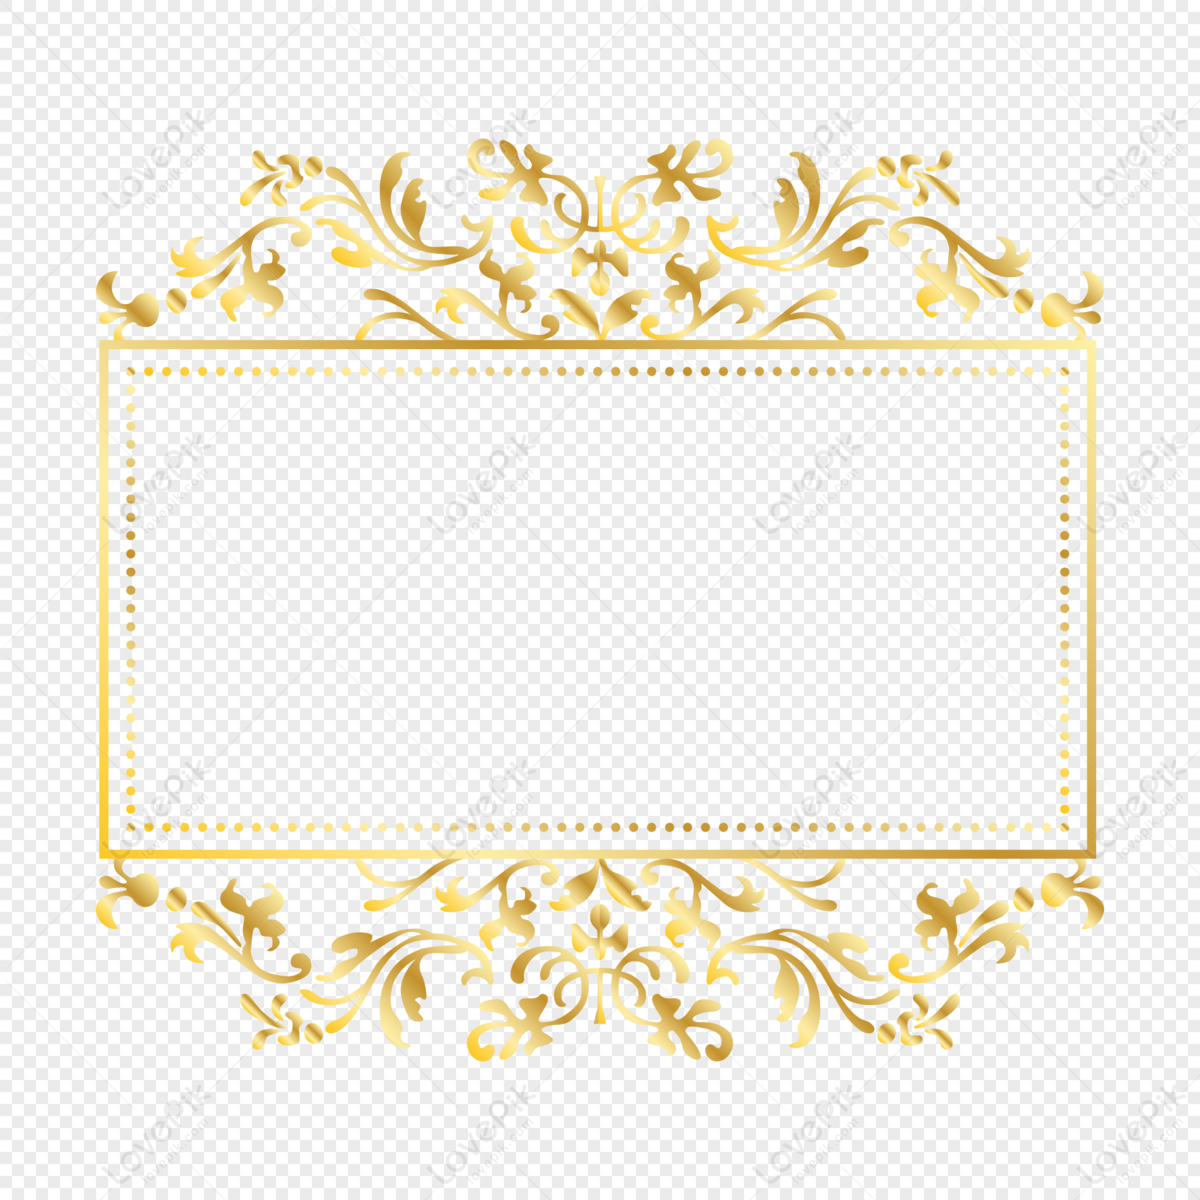 Invitation Letter Border Vector PNG Transparent Background And Clipart  Image For Free Download - Lovepik | 401014370